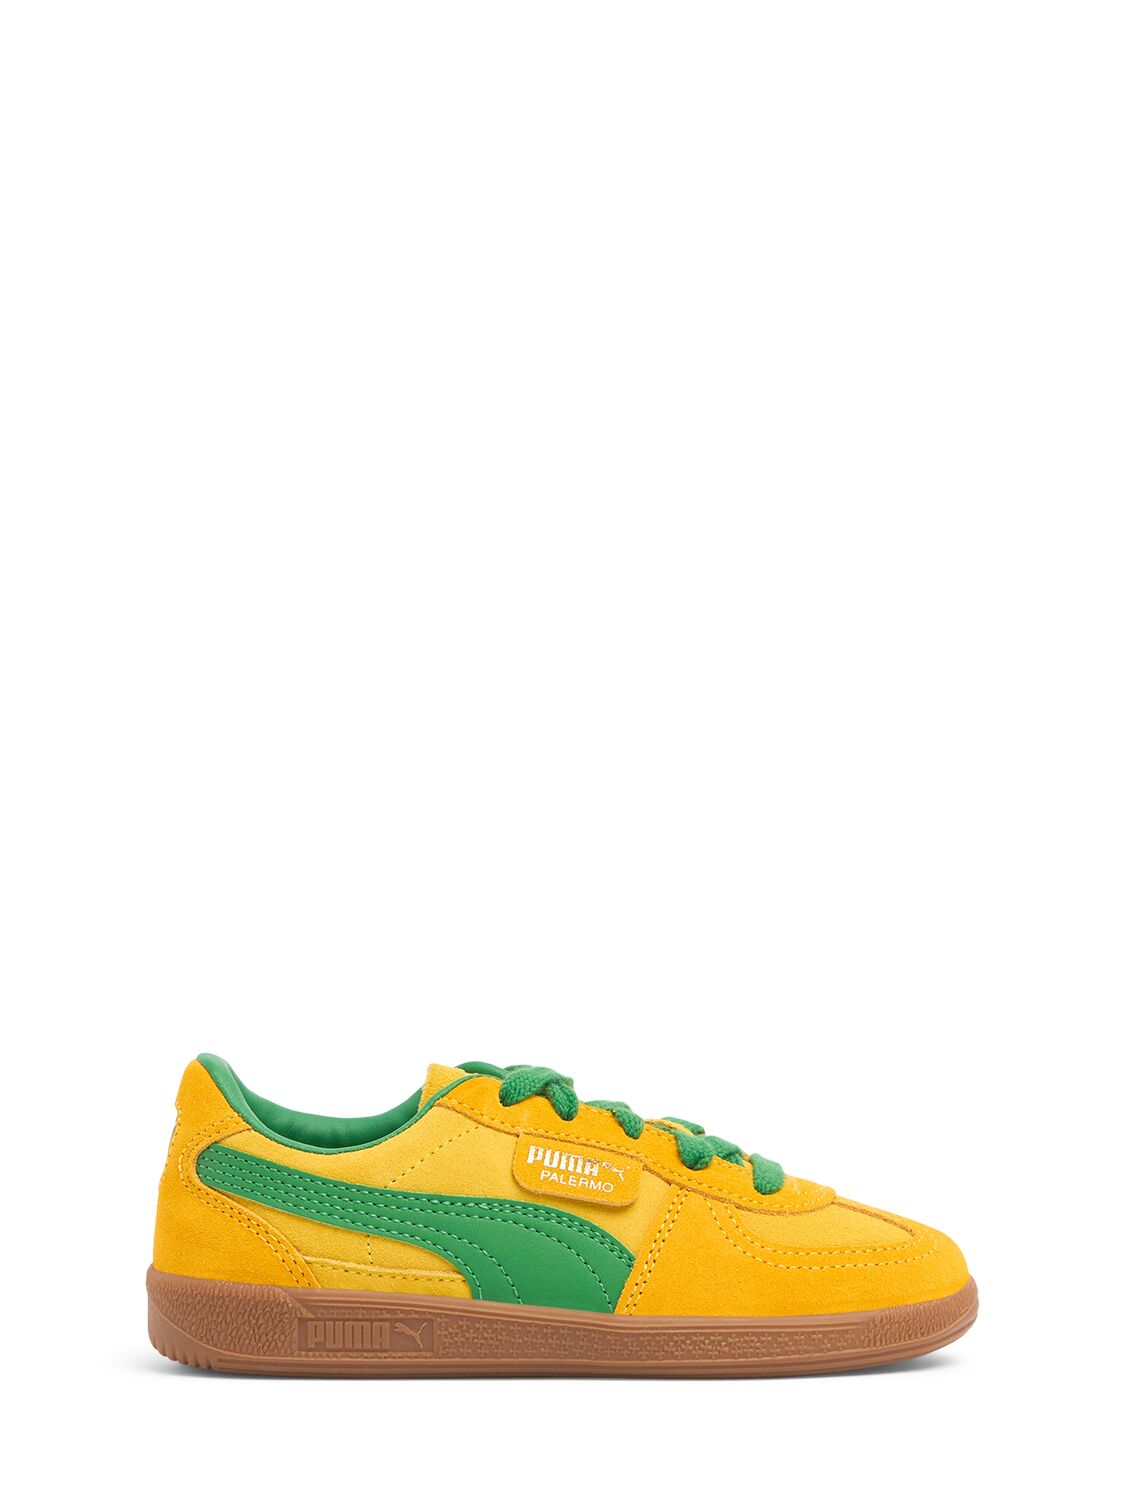 Puma Kids' Palermo Sneakers In Yellow